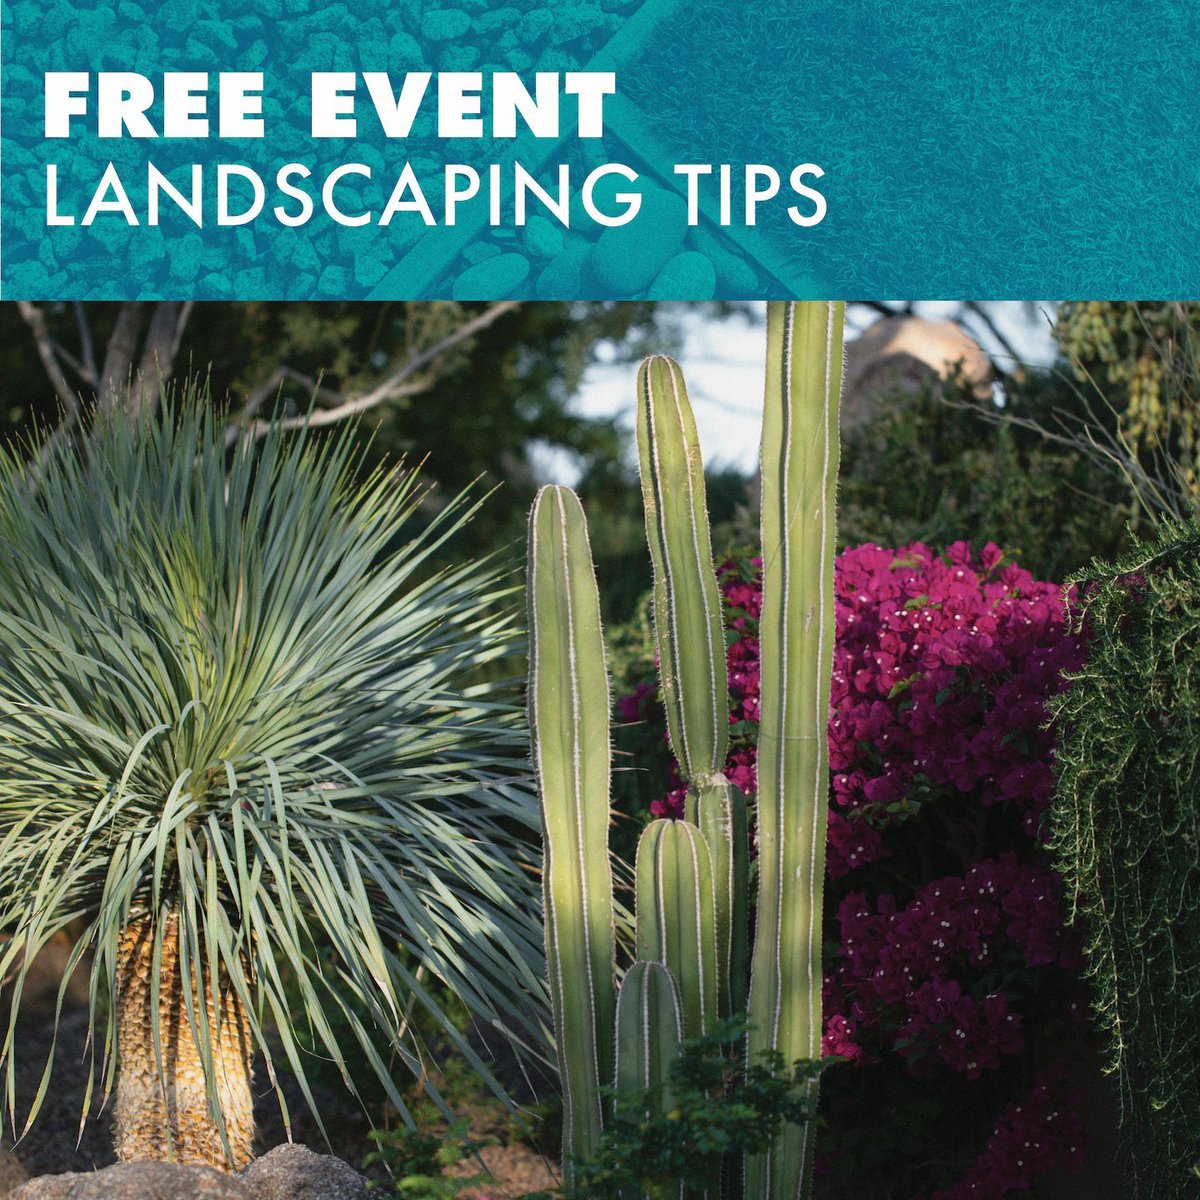 ❗️FREE EVENT: Queen Creek – ABCs of Landscape Watering 🔡 This class will give you the tools to water your landscape efficiently in our unique desert environment. @townofqueencreek #WaterUseItWisely #AZ 🗓️ April 13 @ 9:00 am - 11:00 am 📍 Register here: buff.ly/41Ryr0p